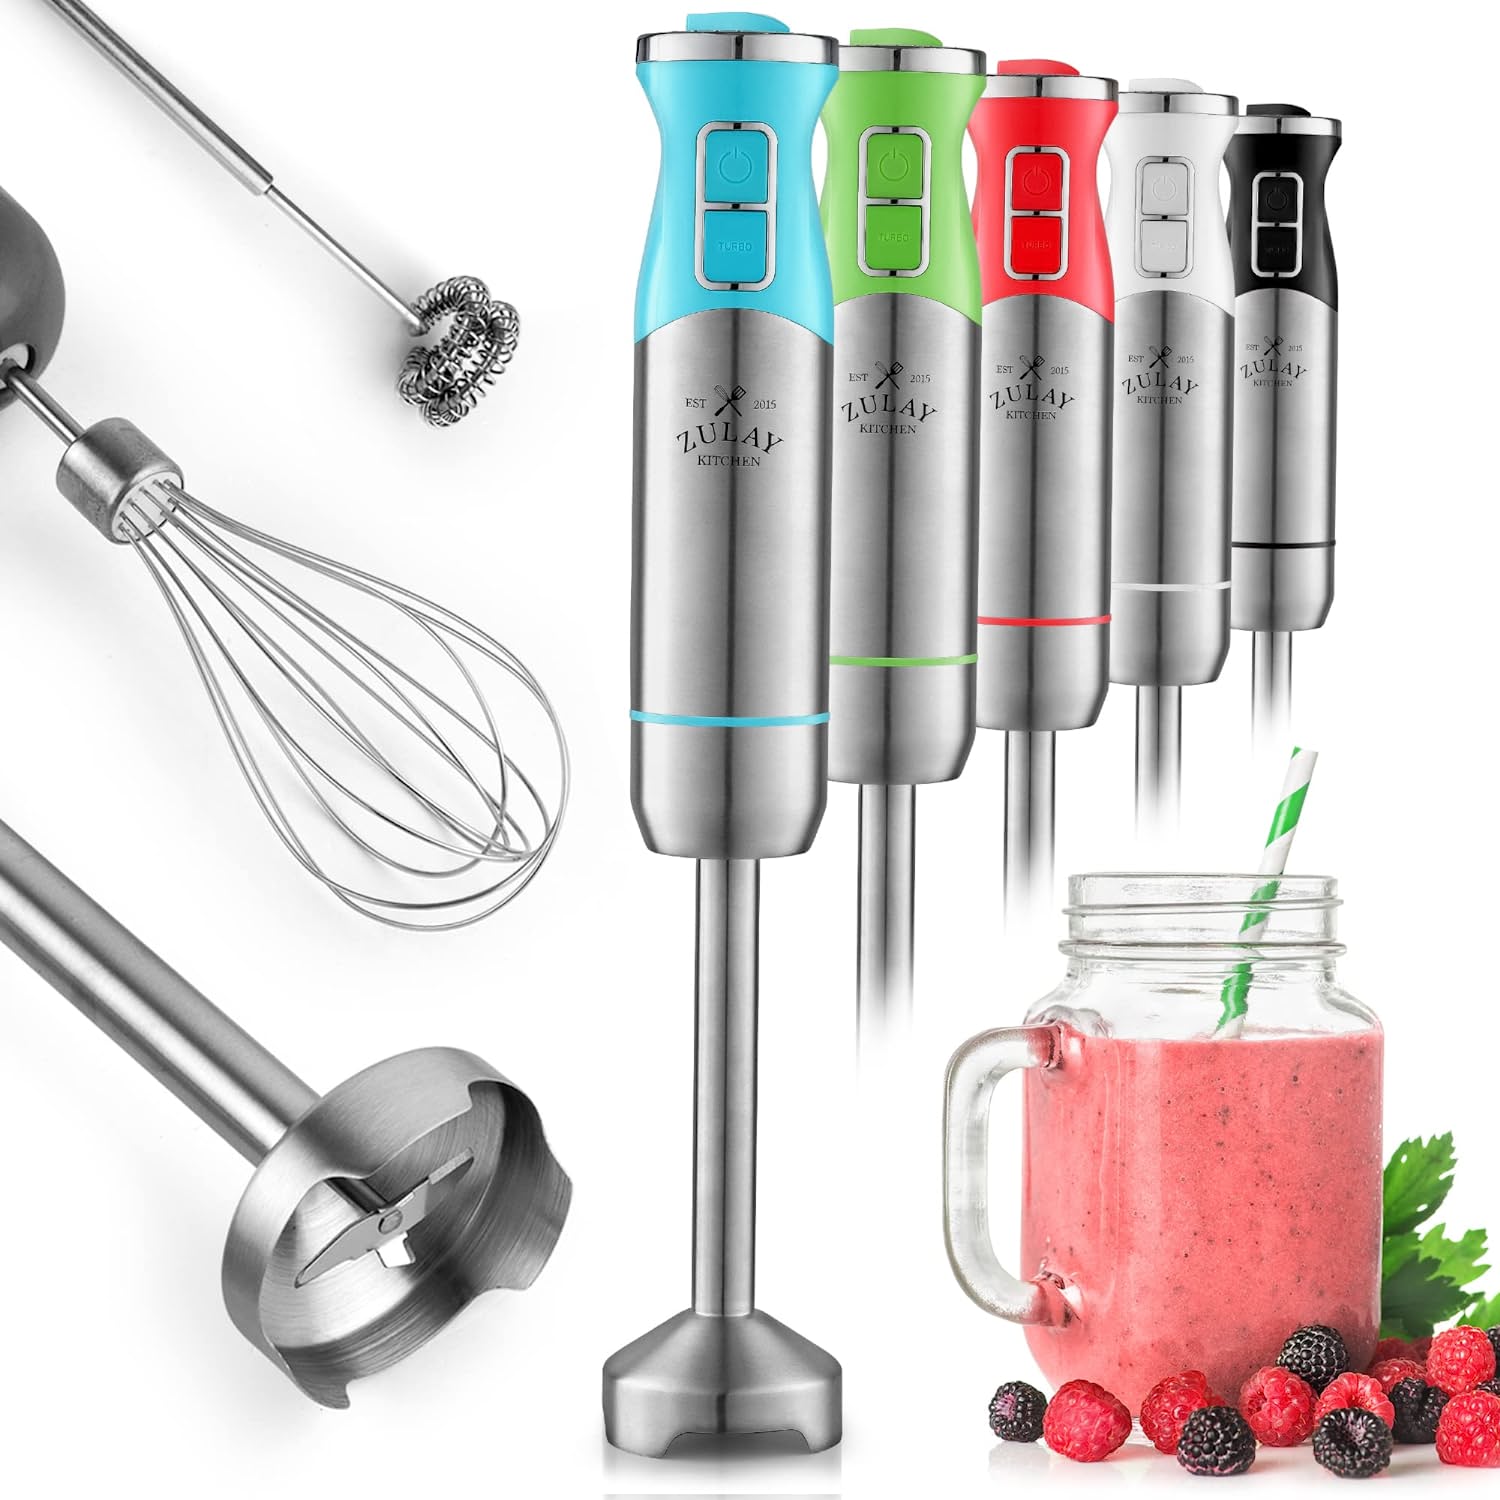 Immersion Blender Online Zulay - Save Today